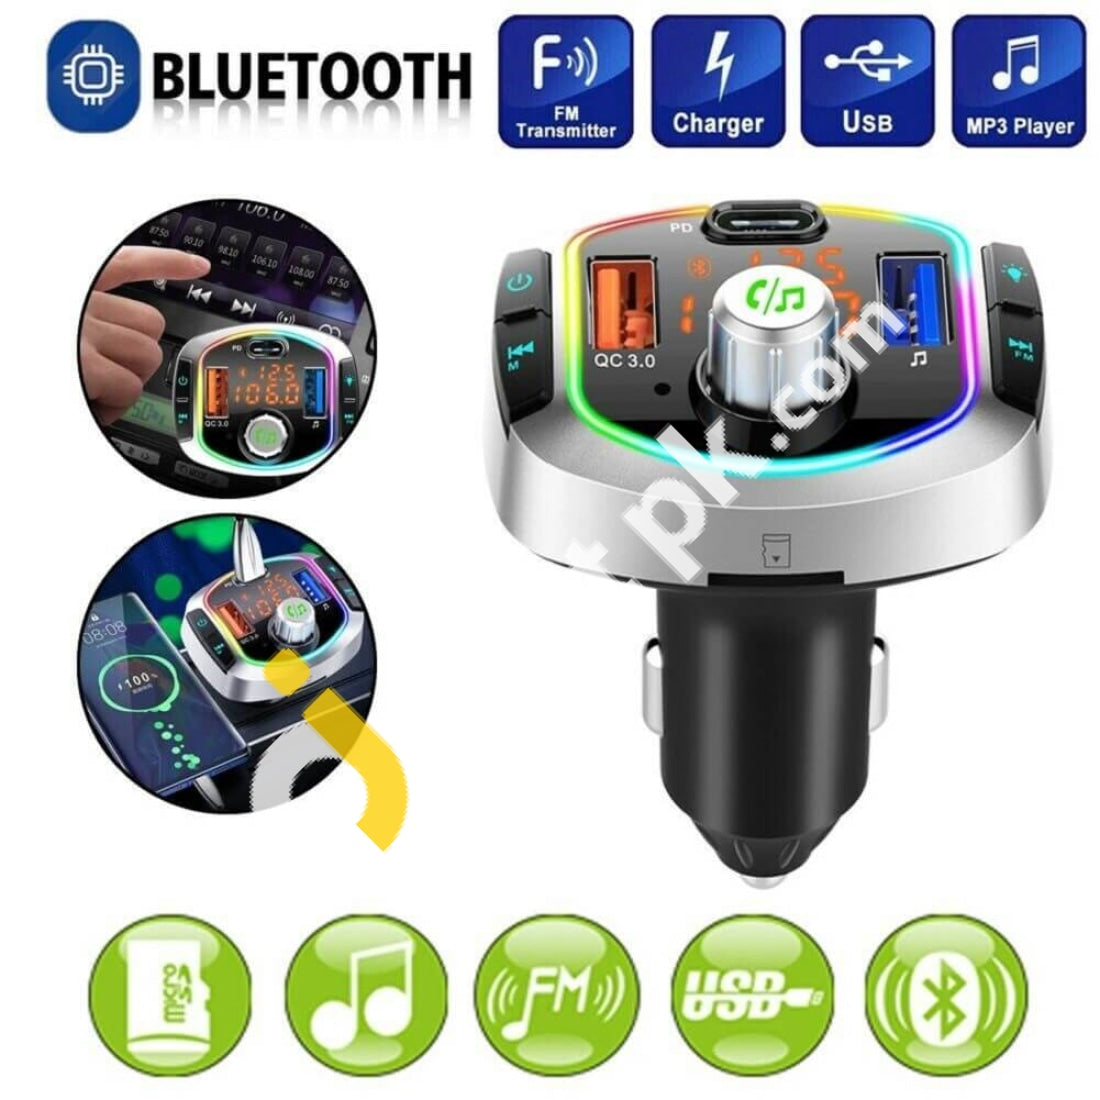 Bluetooth Fm Transmitter For Car, Qc3.0 & 7 Colors Led Backlit Car Bluetooth  Adapter Music Player Hands Free Car Kit With Sd Card Slot, Supports Usb